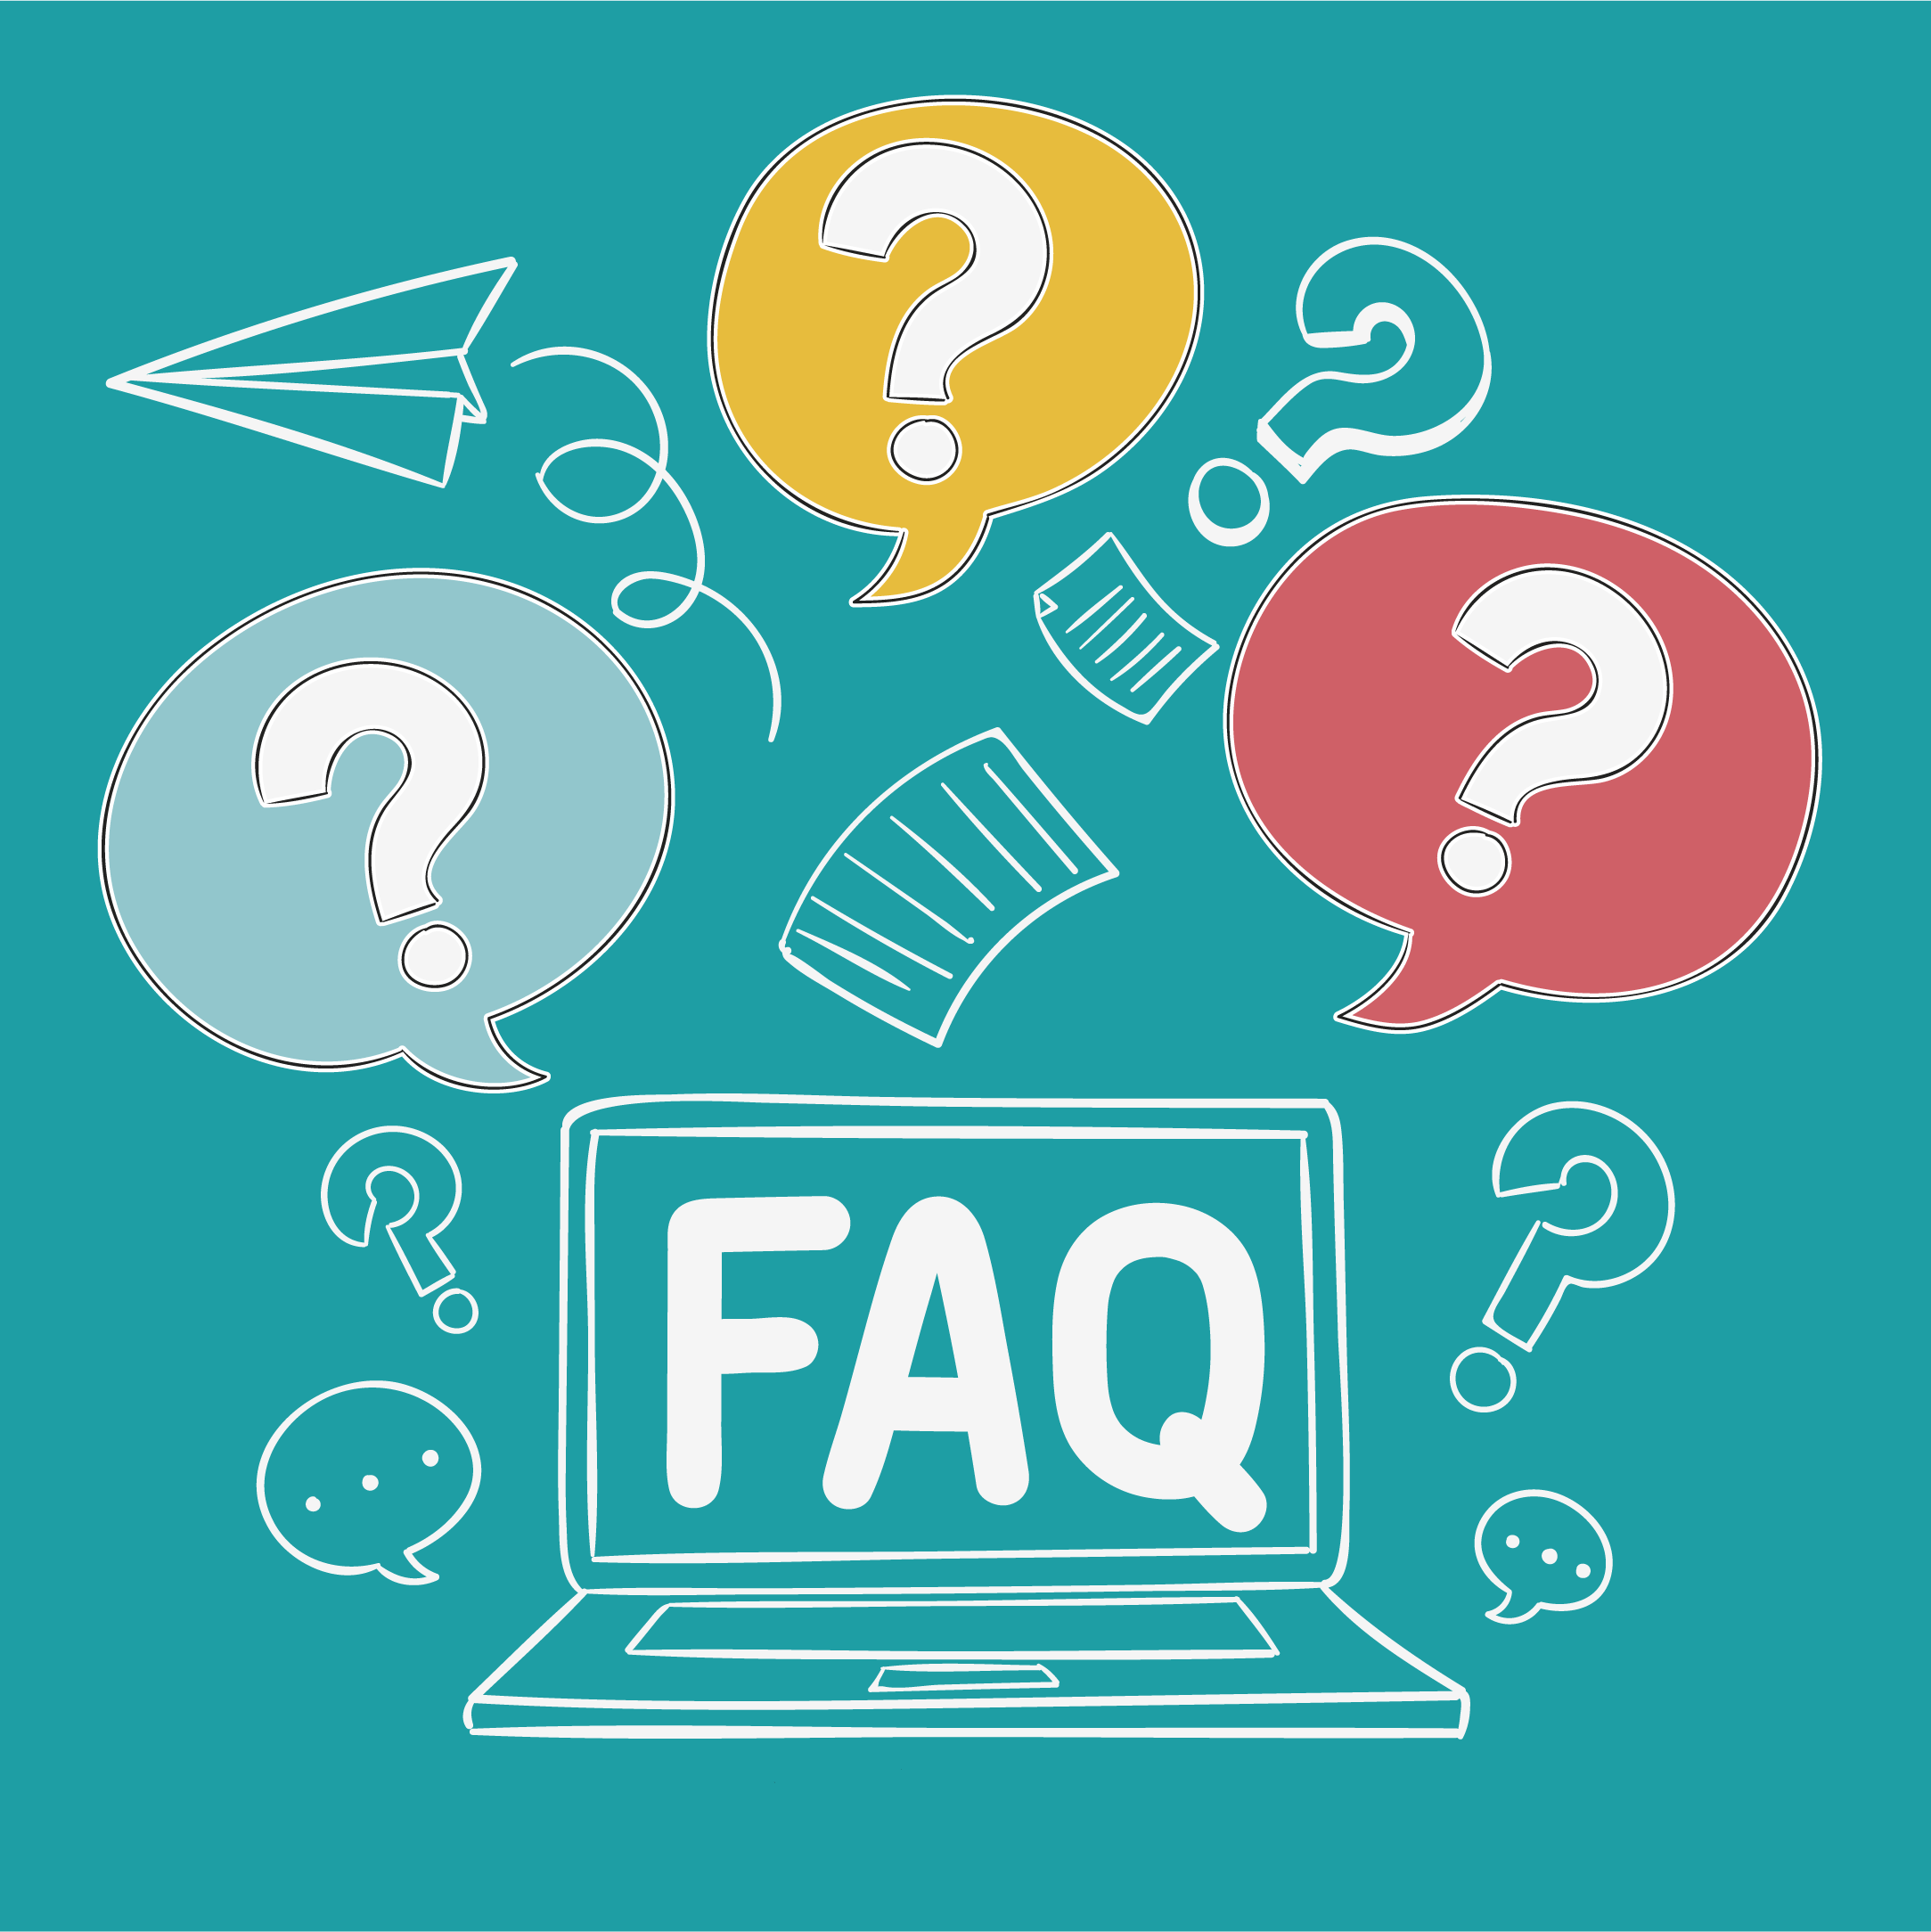 FAQs: using a knowledge base to increase conversions